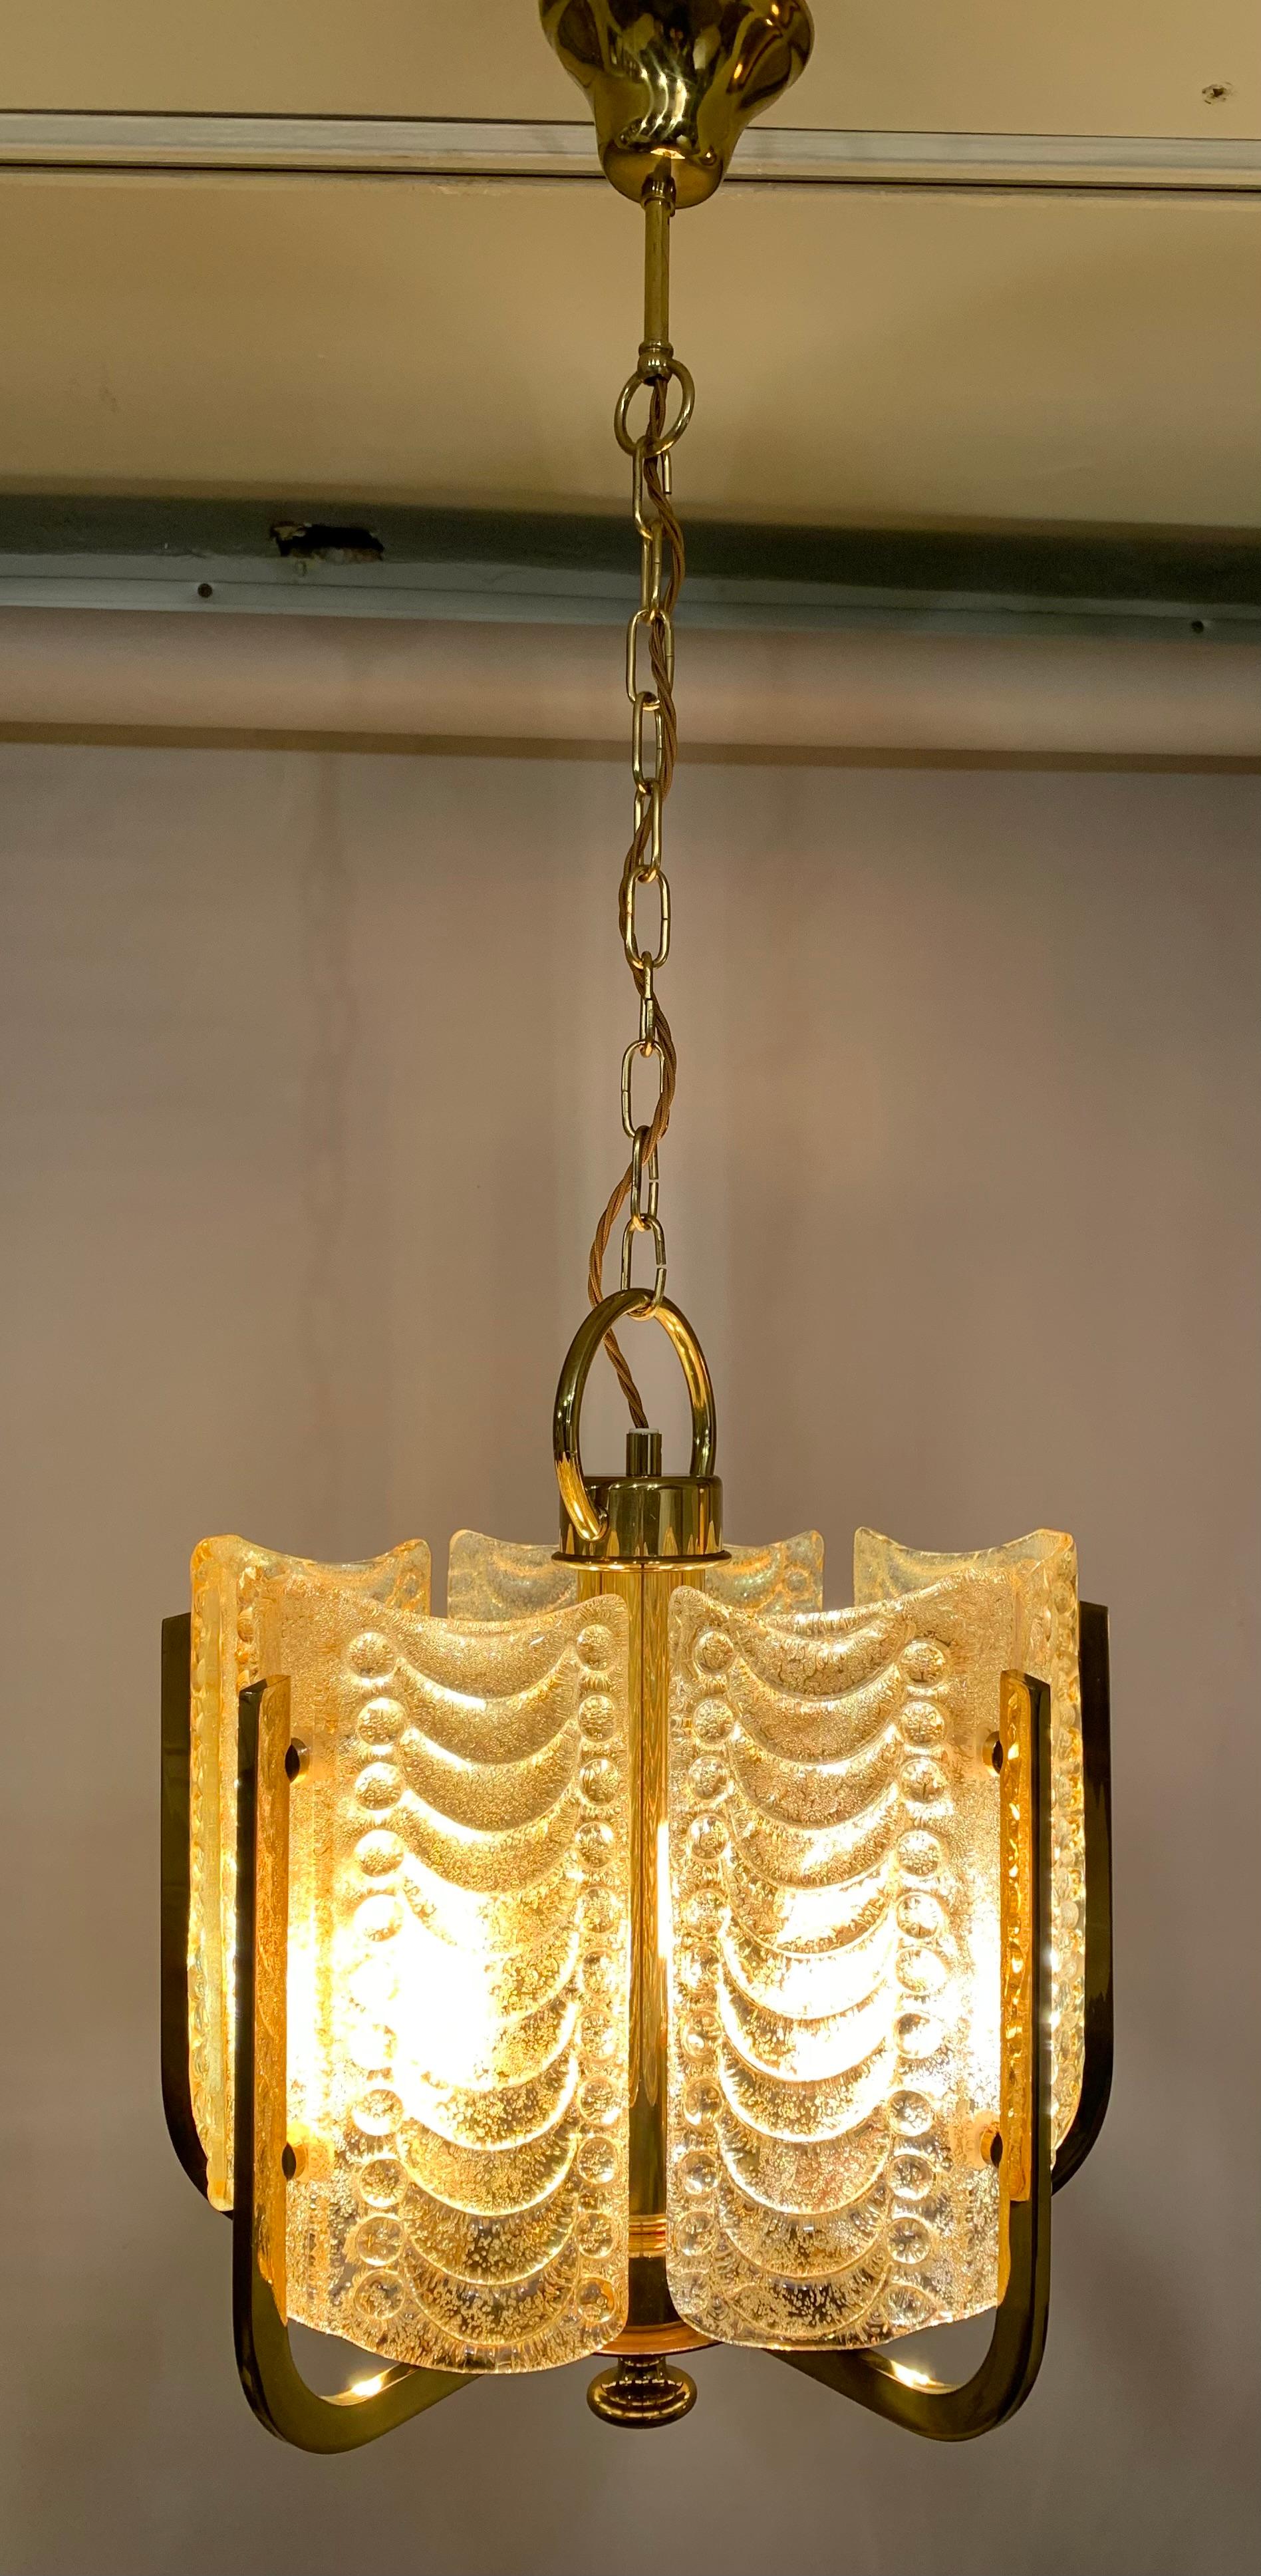 1950s Swedish chandelier designed by Carl Fagerlund for Orrefors. The light is designed with five thick gold-tinted textured glass fins, with a garland design, which screw internally onto the polished brass frame. Each fan is wonderfully textured on